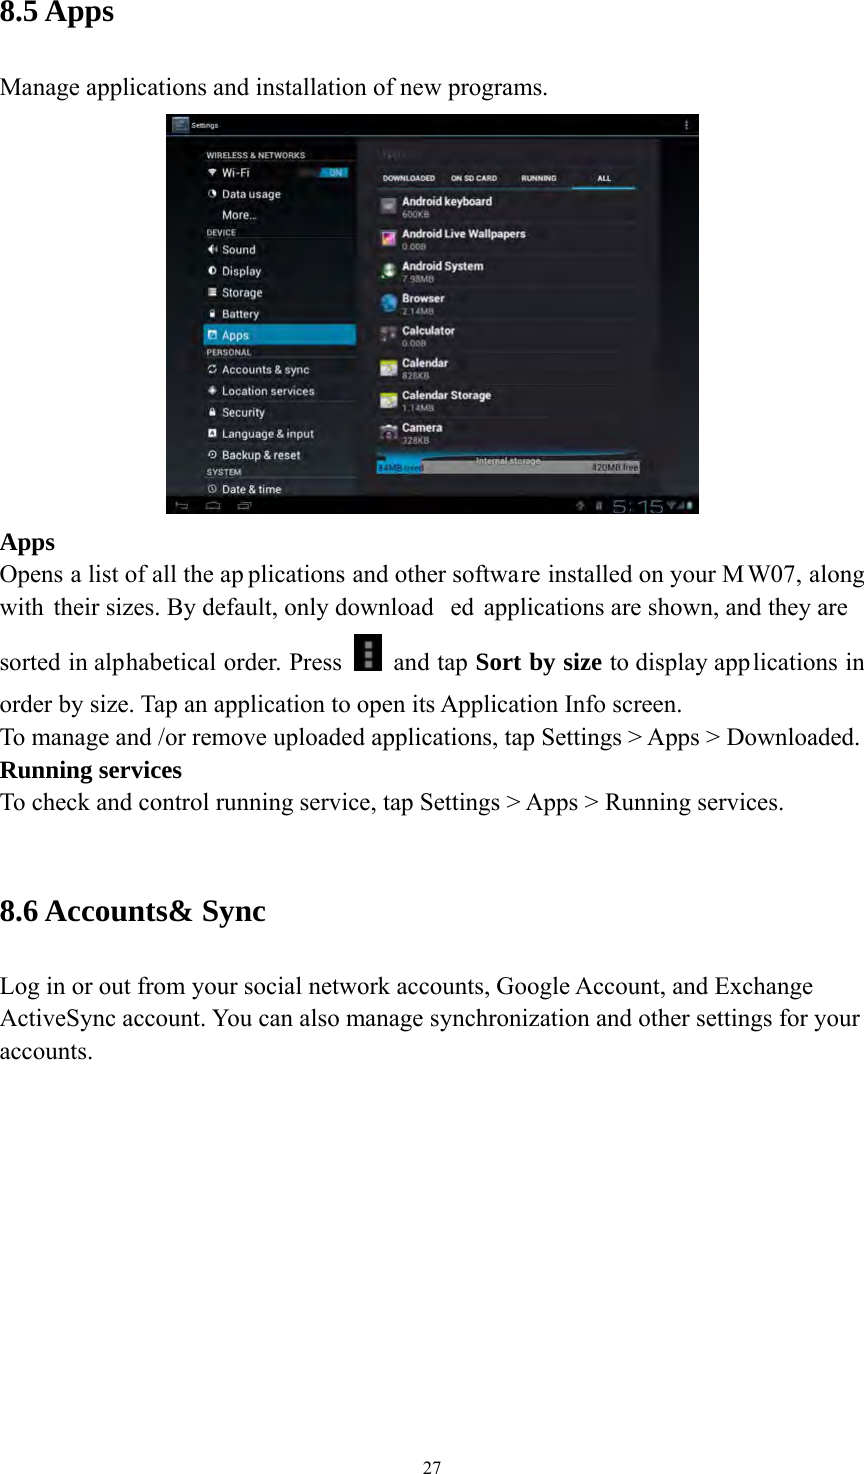 27 8.5 Apps   Manage applications and installation of new programs.  Apps  Opens a list of all the ap plications and other software installed on your M W07, along with their sizes. By default, only download ed applications are shown, and they are  sorted in alphabetical order. Press   and tap Sort by size to display applications in order by size. Tap an application to open its Application Info screen. To manage and /or remove uploaded applications, tap Settings &gt; Apps &gt; Downloaded.     Running services To check and control running service, tap Settings &gt; Apps &gt; Running services.    8.6 Accounts&amp; Sync Log in or out from your social network accounts, Google Account, and Exchange ActiveSync account. You can also manage synchronization and other settings for your accounts.   